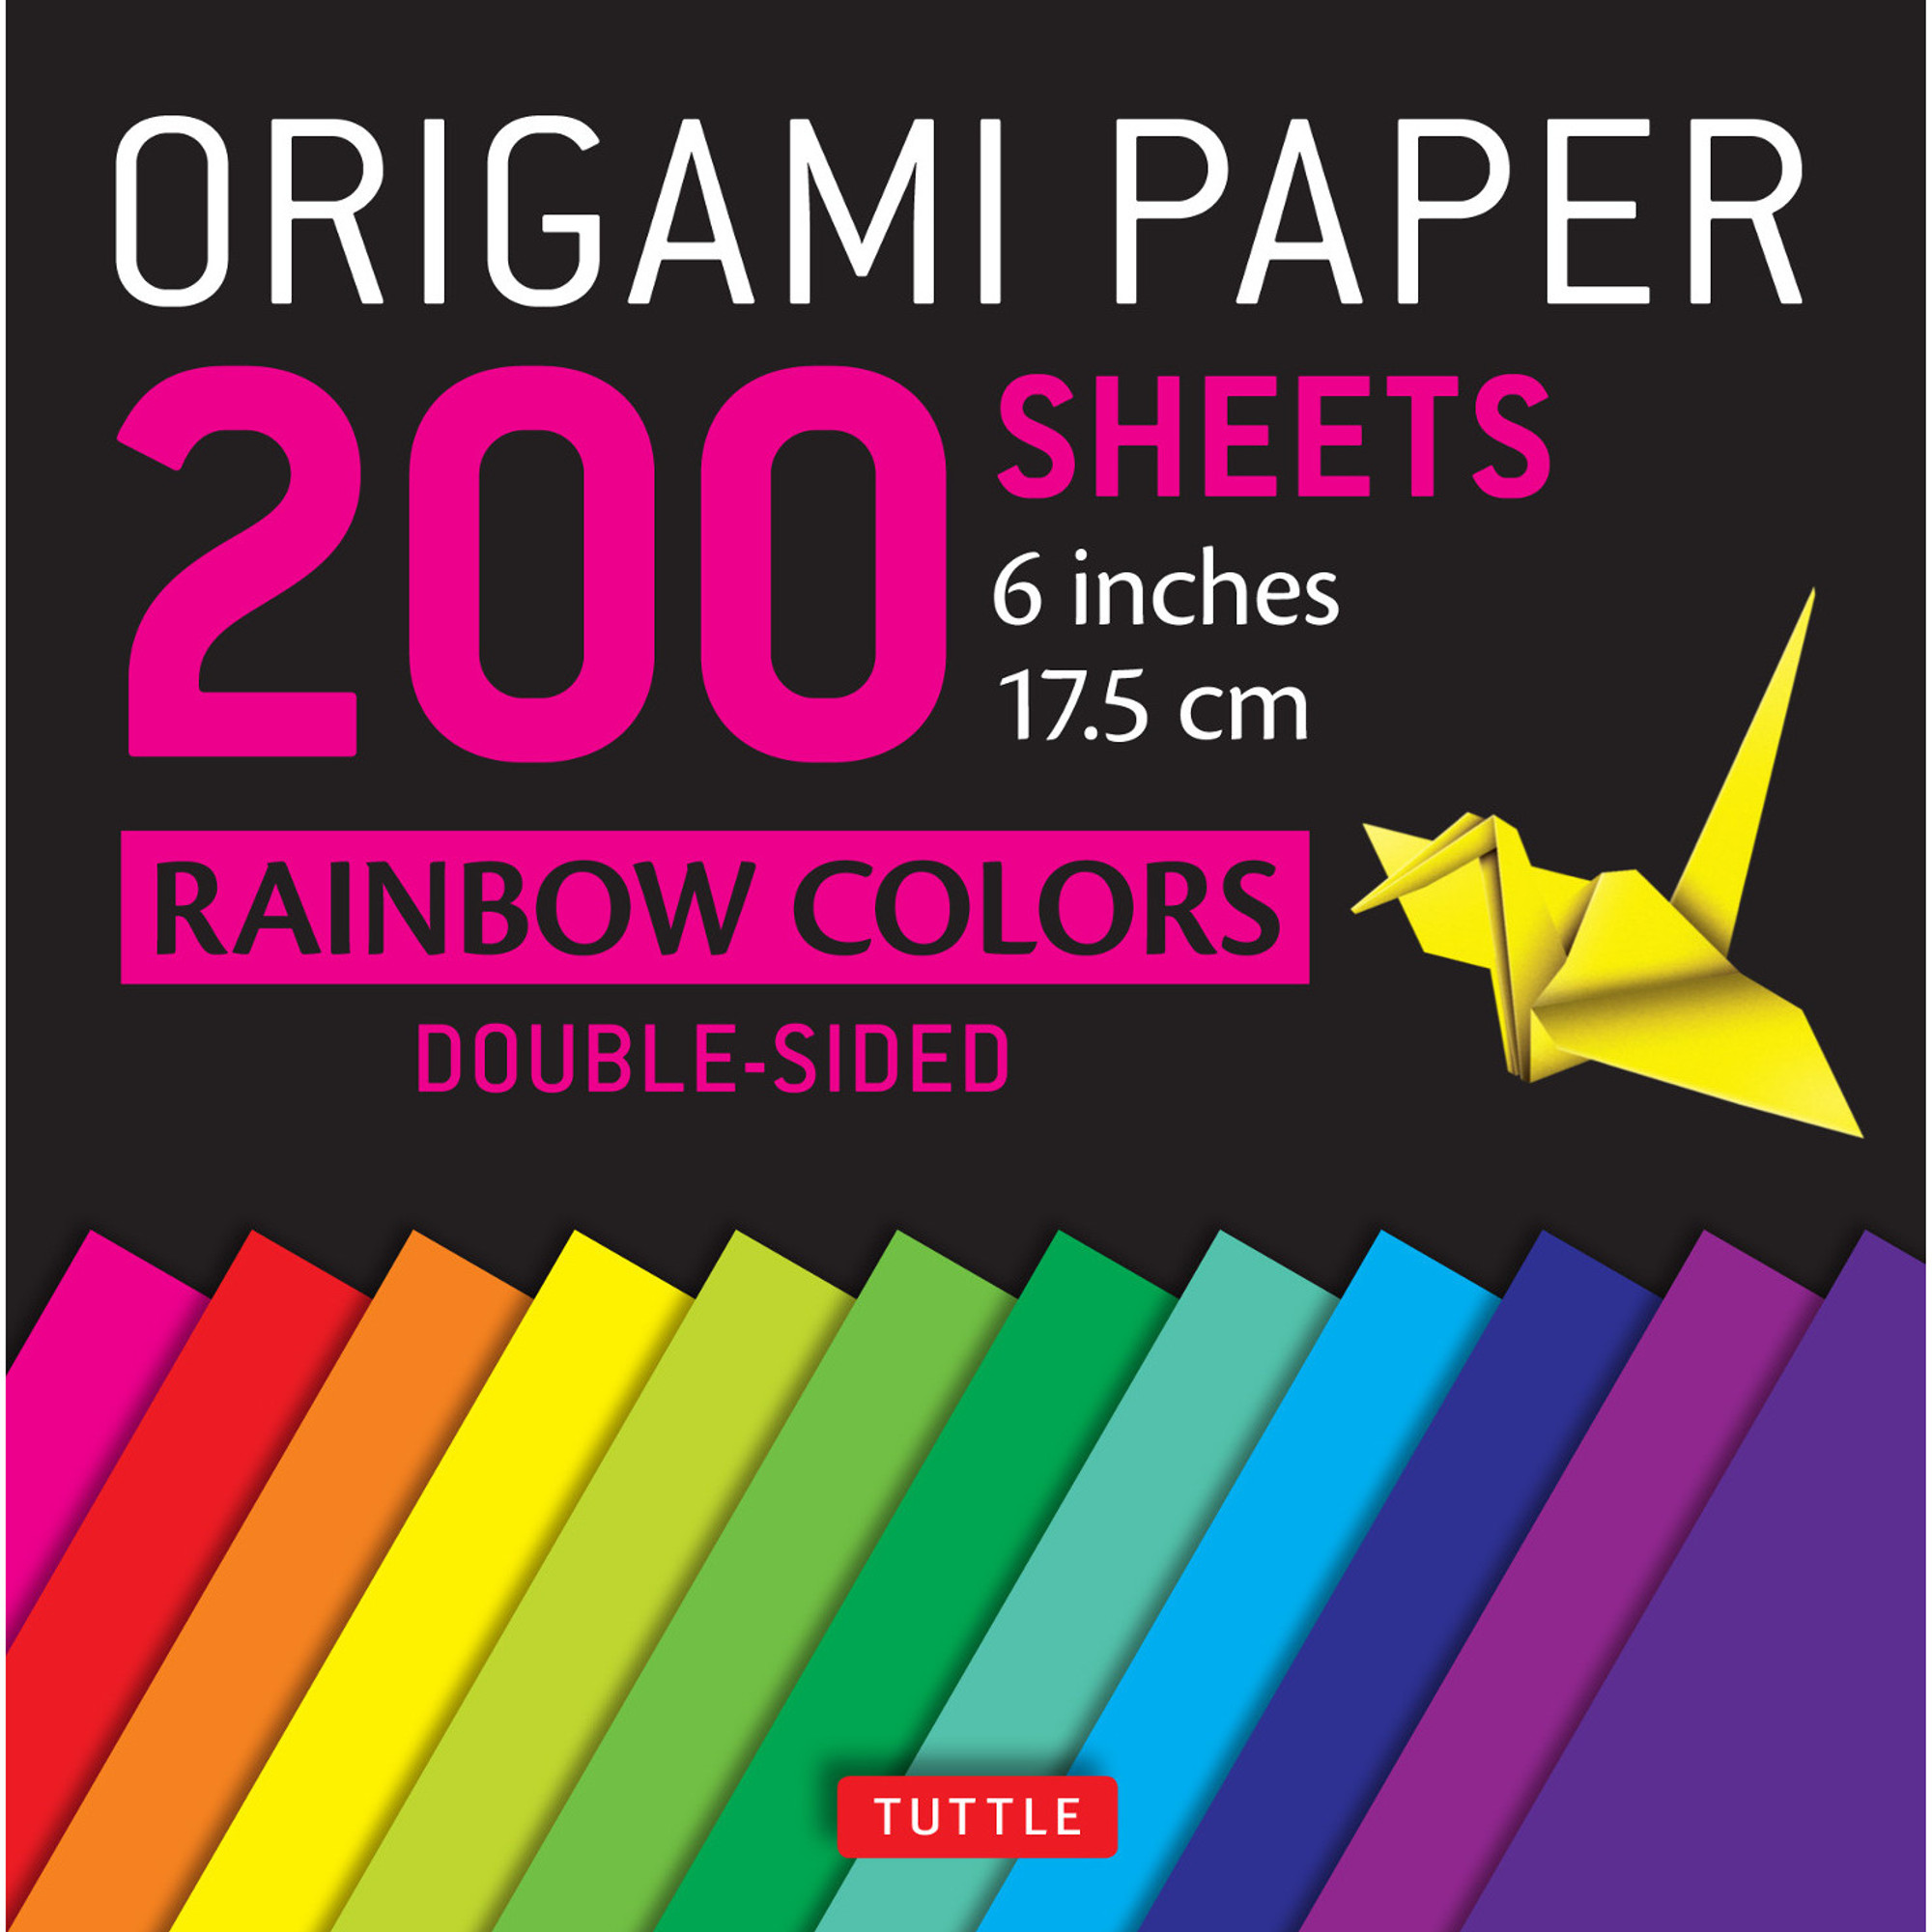 Iooleem Origami Paper, 200 Sheets, Fluo Pink Origami Papers, 6 inch Square, Double Sided Colored Paper.